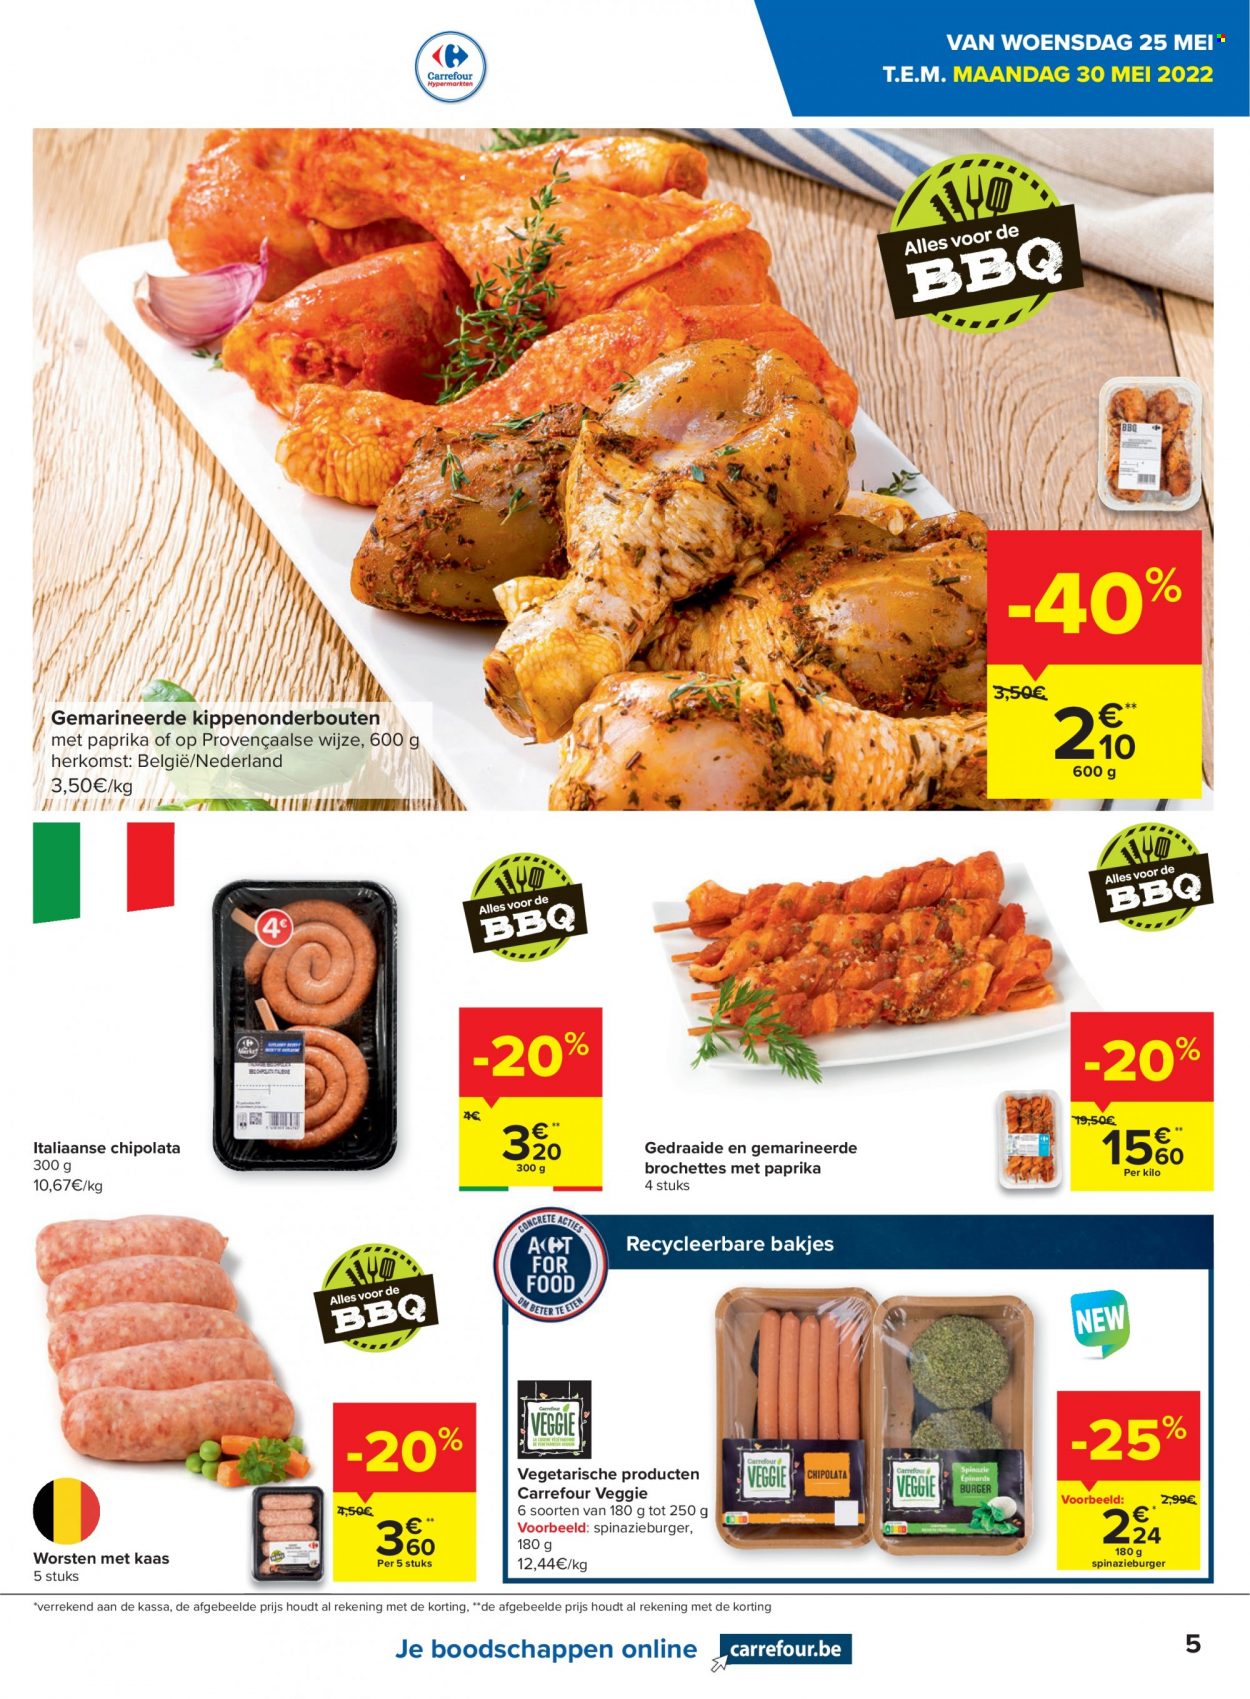 Catalogue Carrefour hypermarkt - 24.5.2022 - 30.5.2022. Page 5.